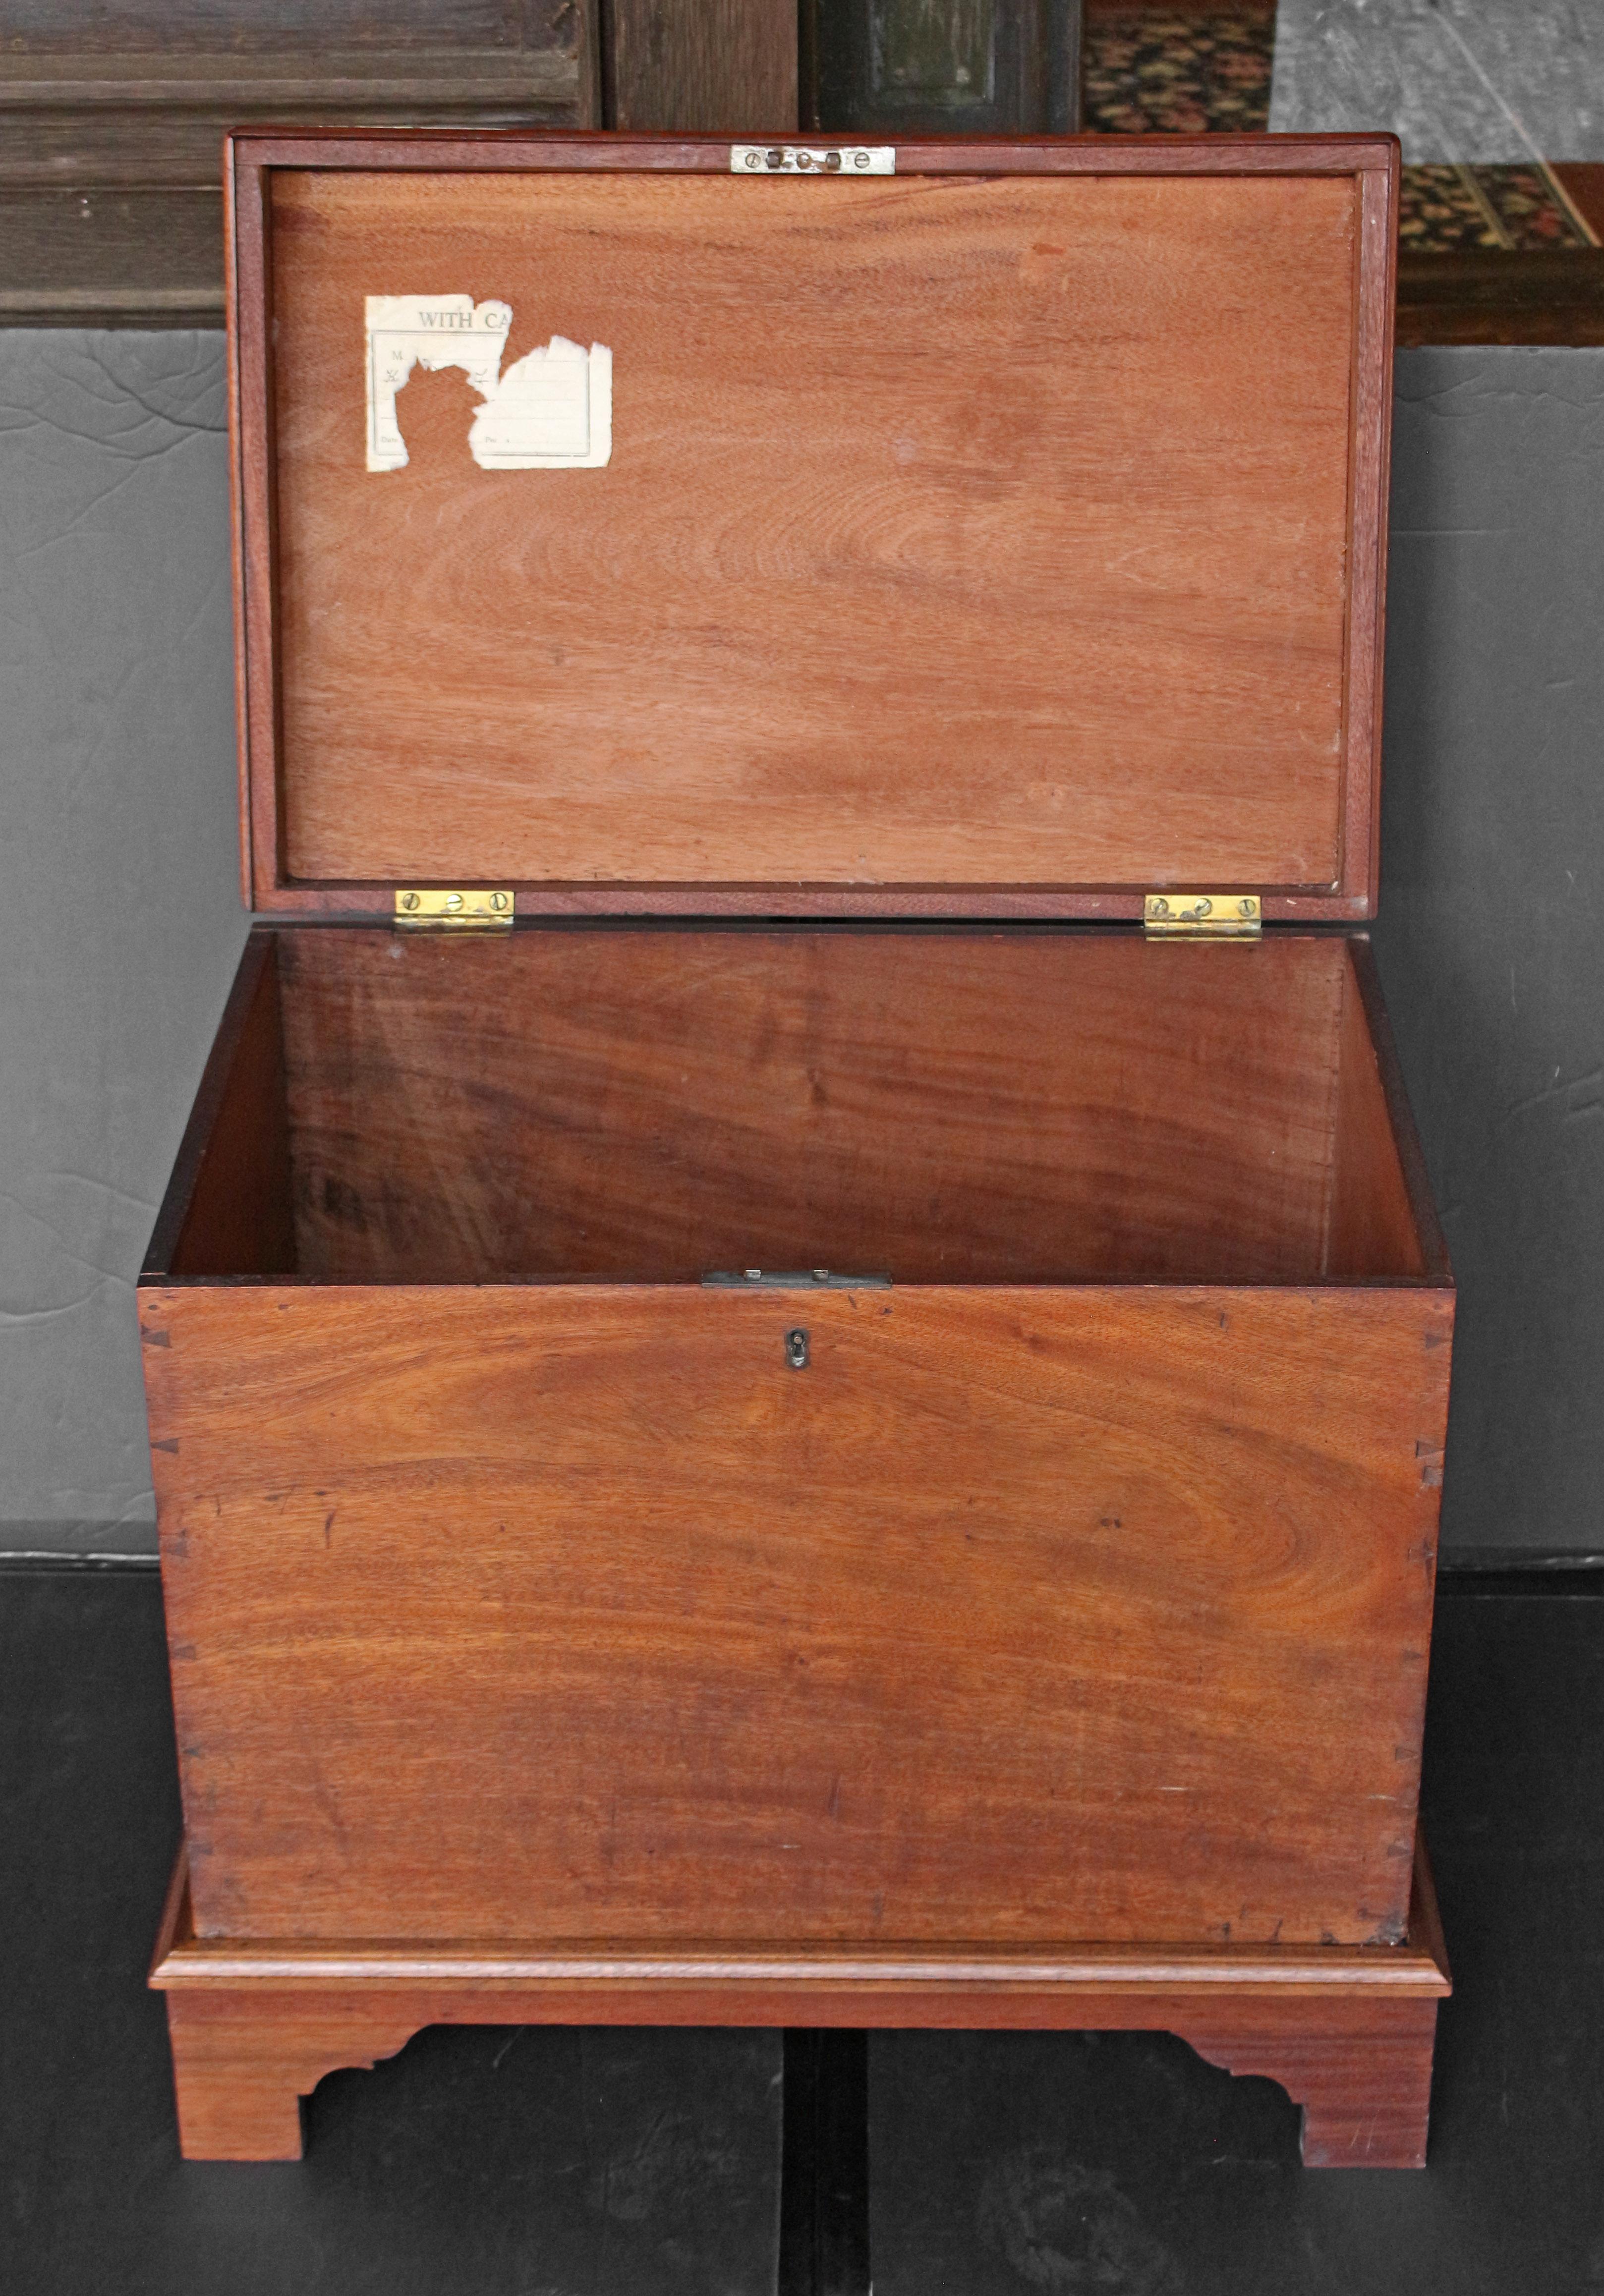 Circa 1830 late Georgian travel chest, on later stand, English. Mahogany of good color with heavy bail & rosette brass handles. Well made dovetails visible as part of the decoration of the piece. Now on bracket footed base. Ideal as a side table or